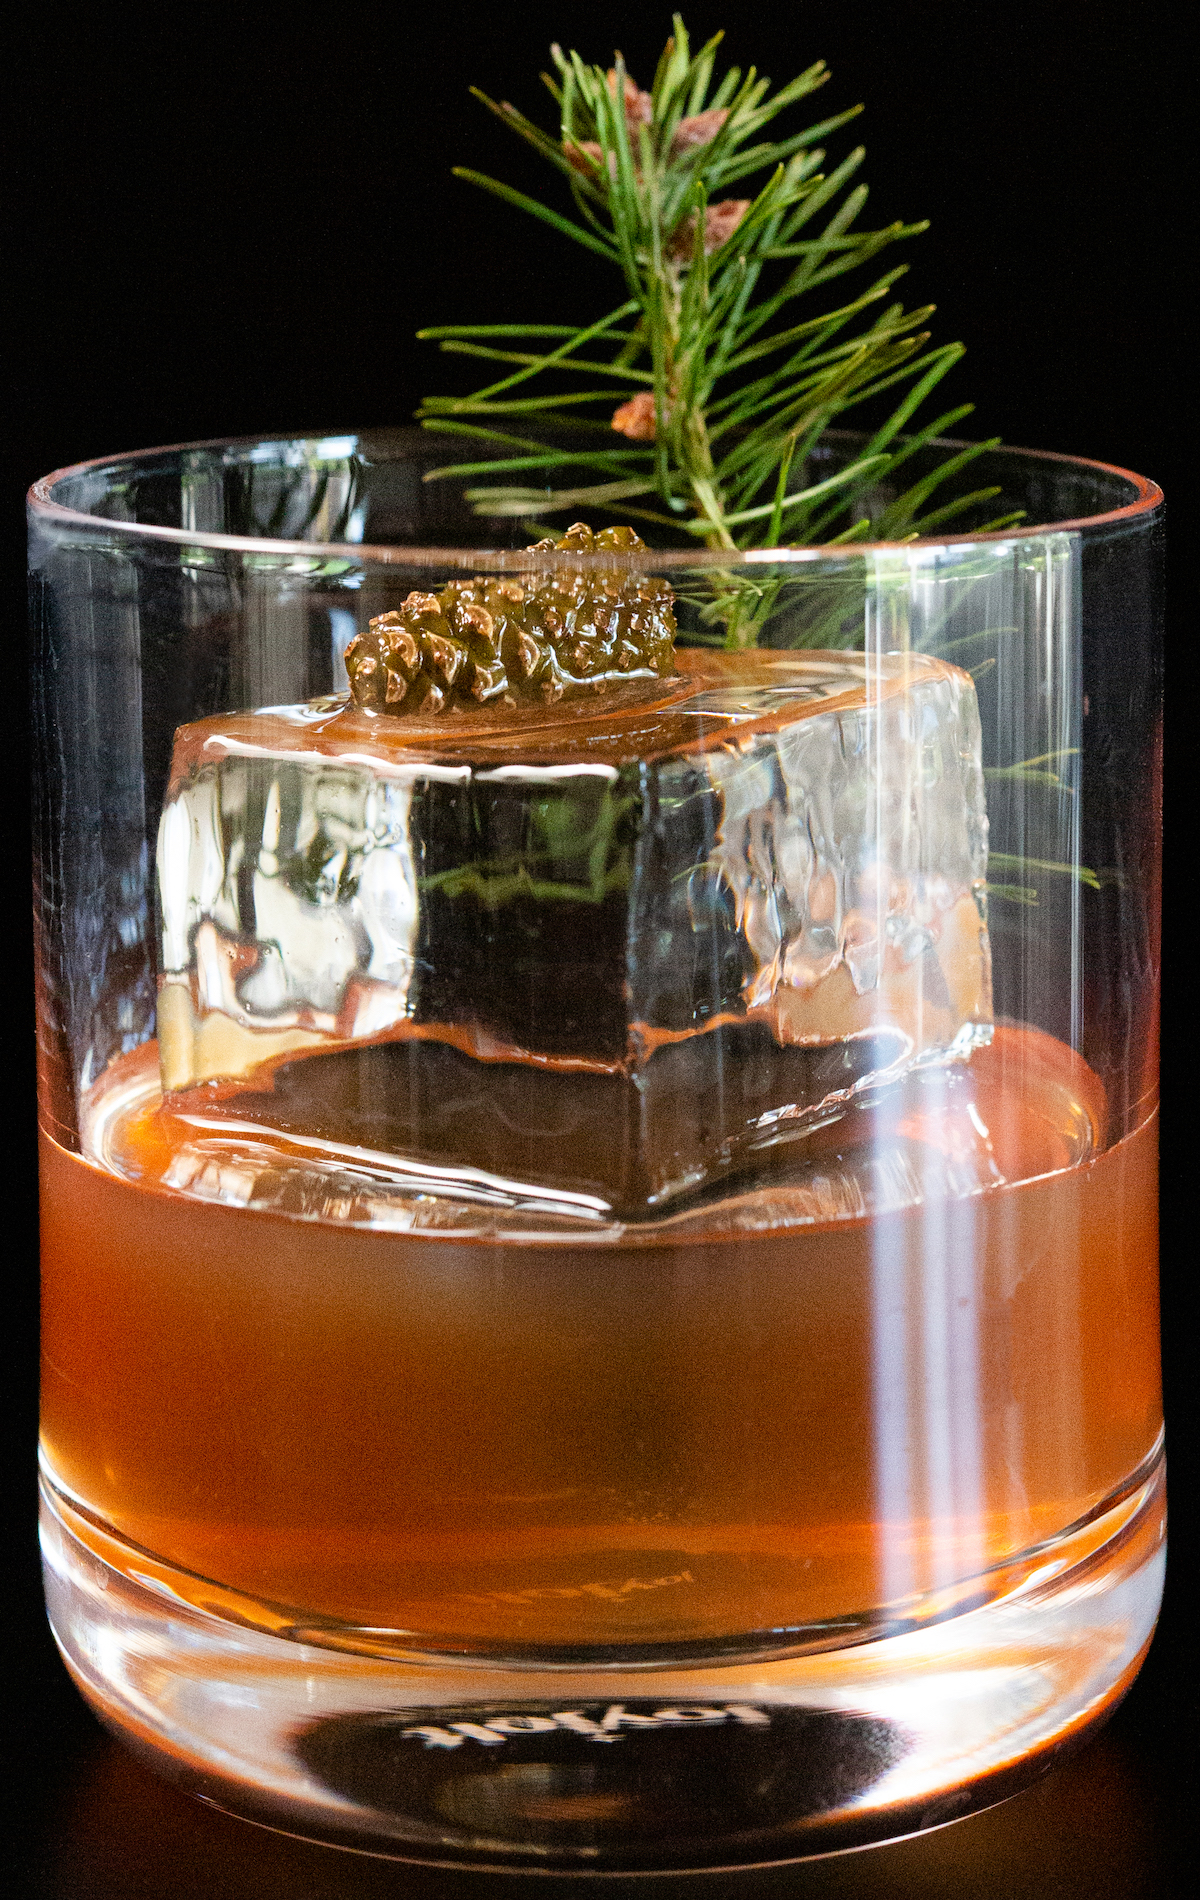 A lowball glass on a black background is filled halfway with a reddish brown Christmas old fashioned. There is a large block of clear ice and a small pine cone and clipping from a Christmas as garnishes.